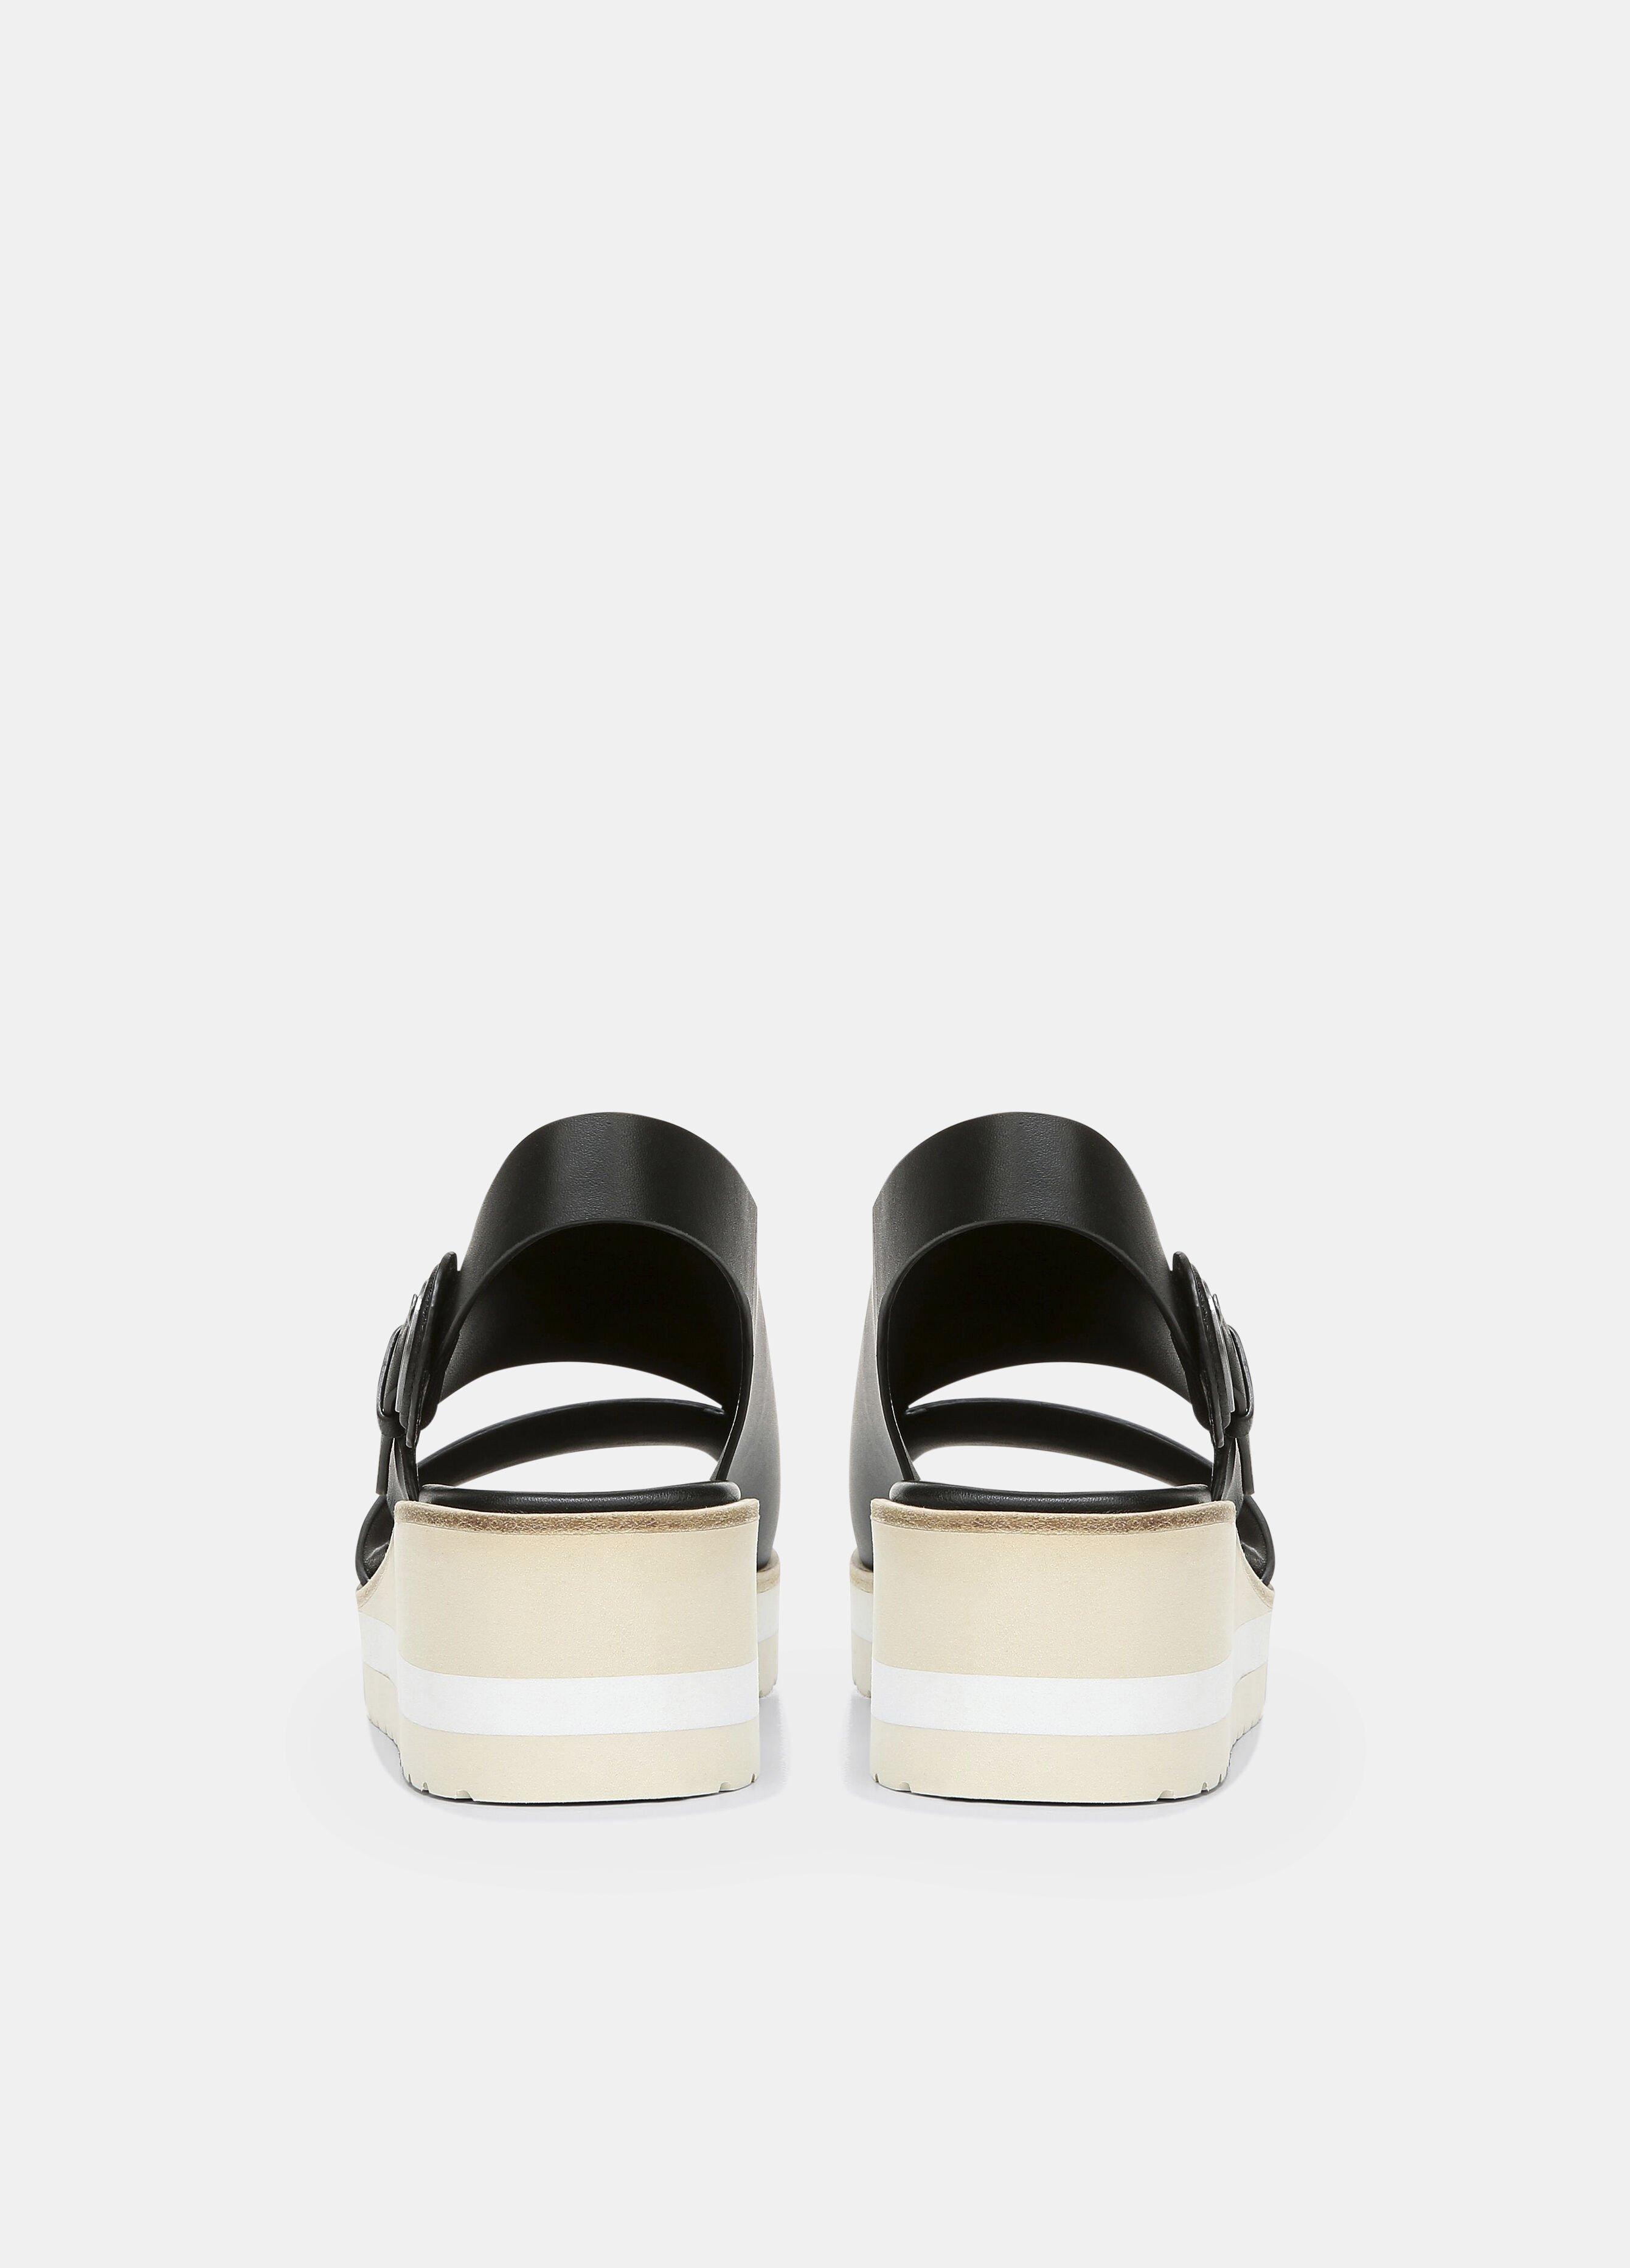 Leather Shelby Wedge Sandal for Women | Vince